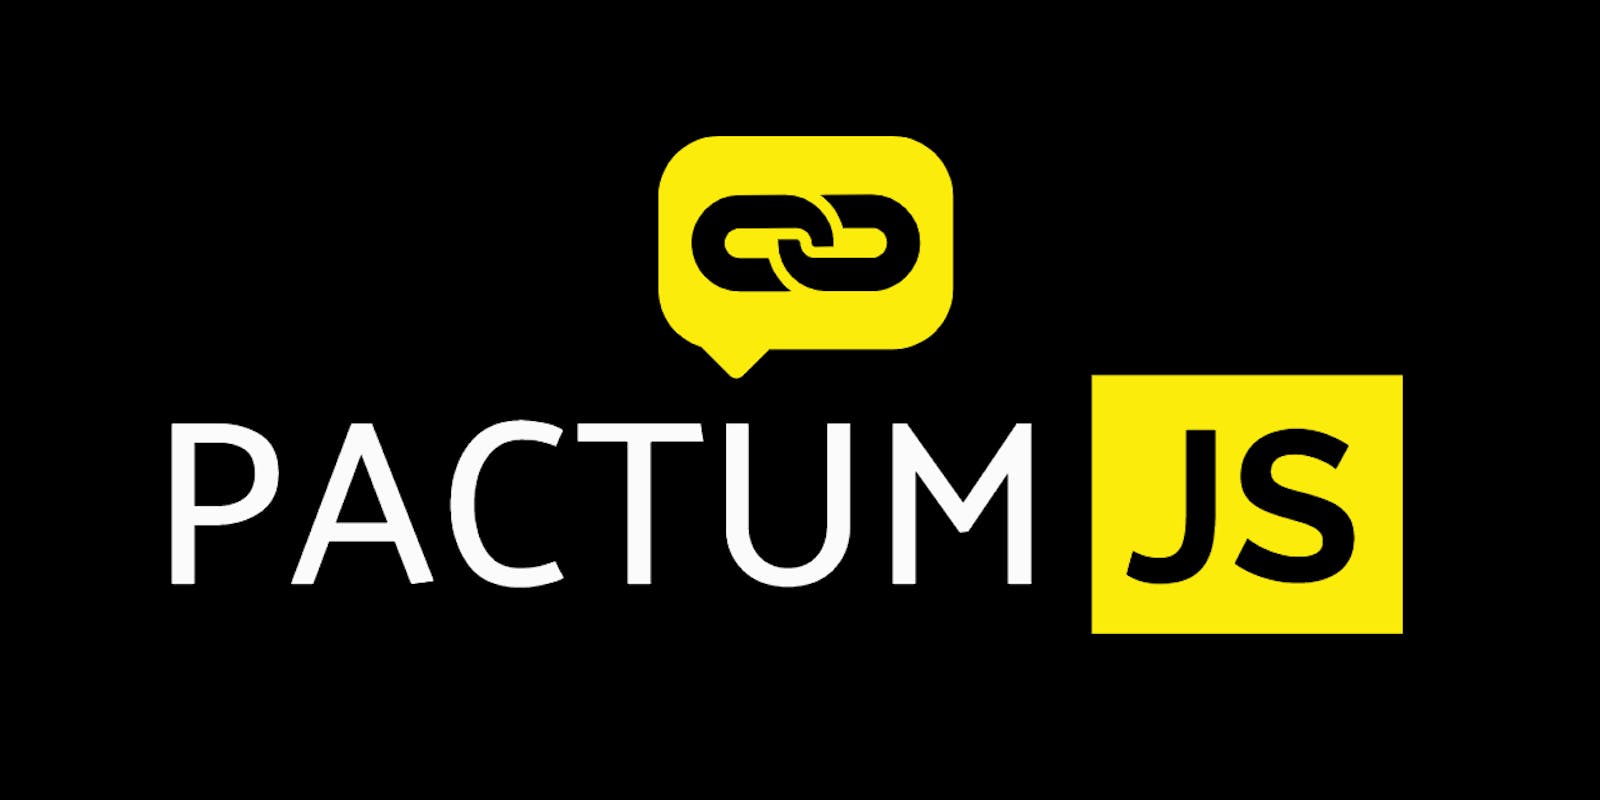 A Complete Guide to PactumJS